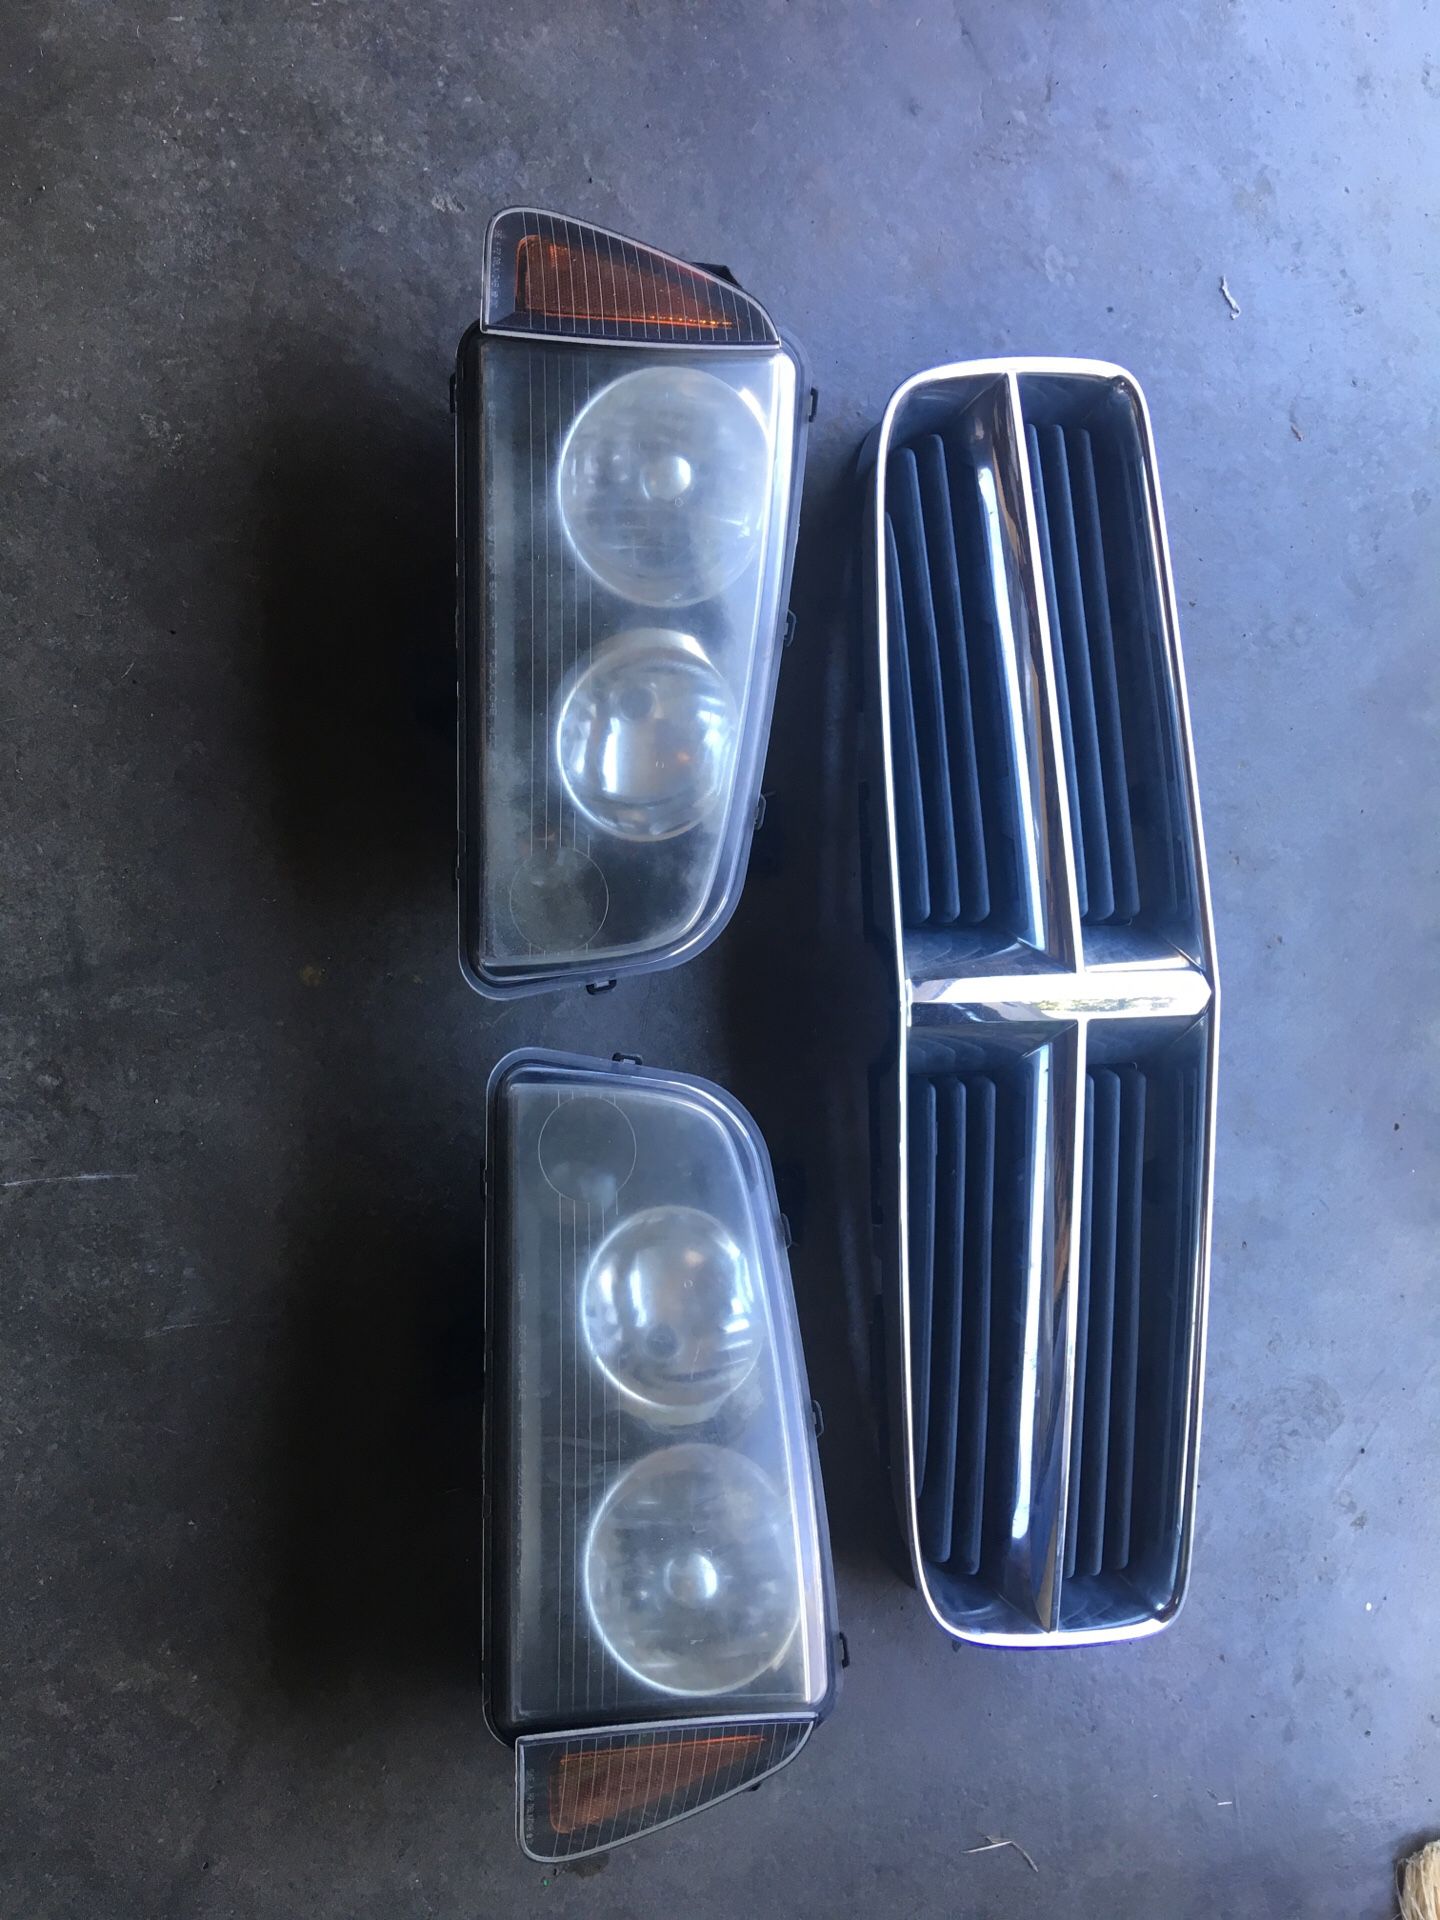 2006 Dodge Charger grill and headlights